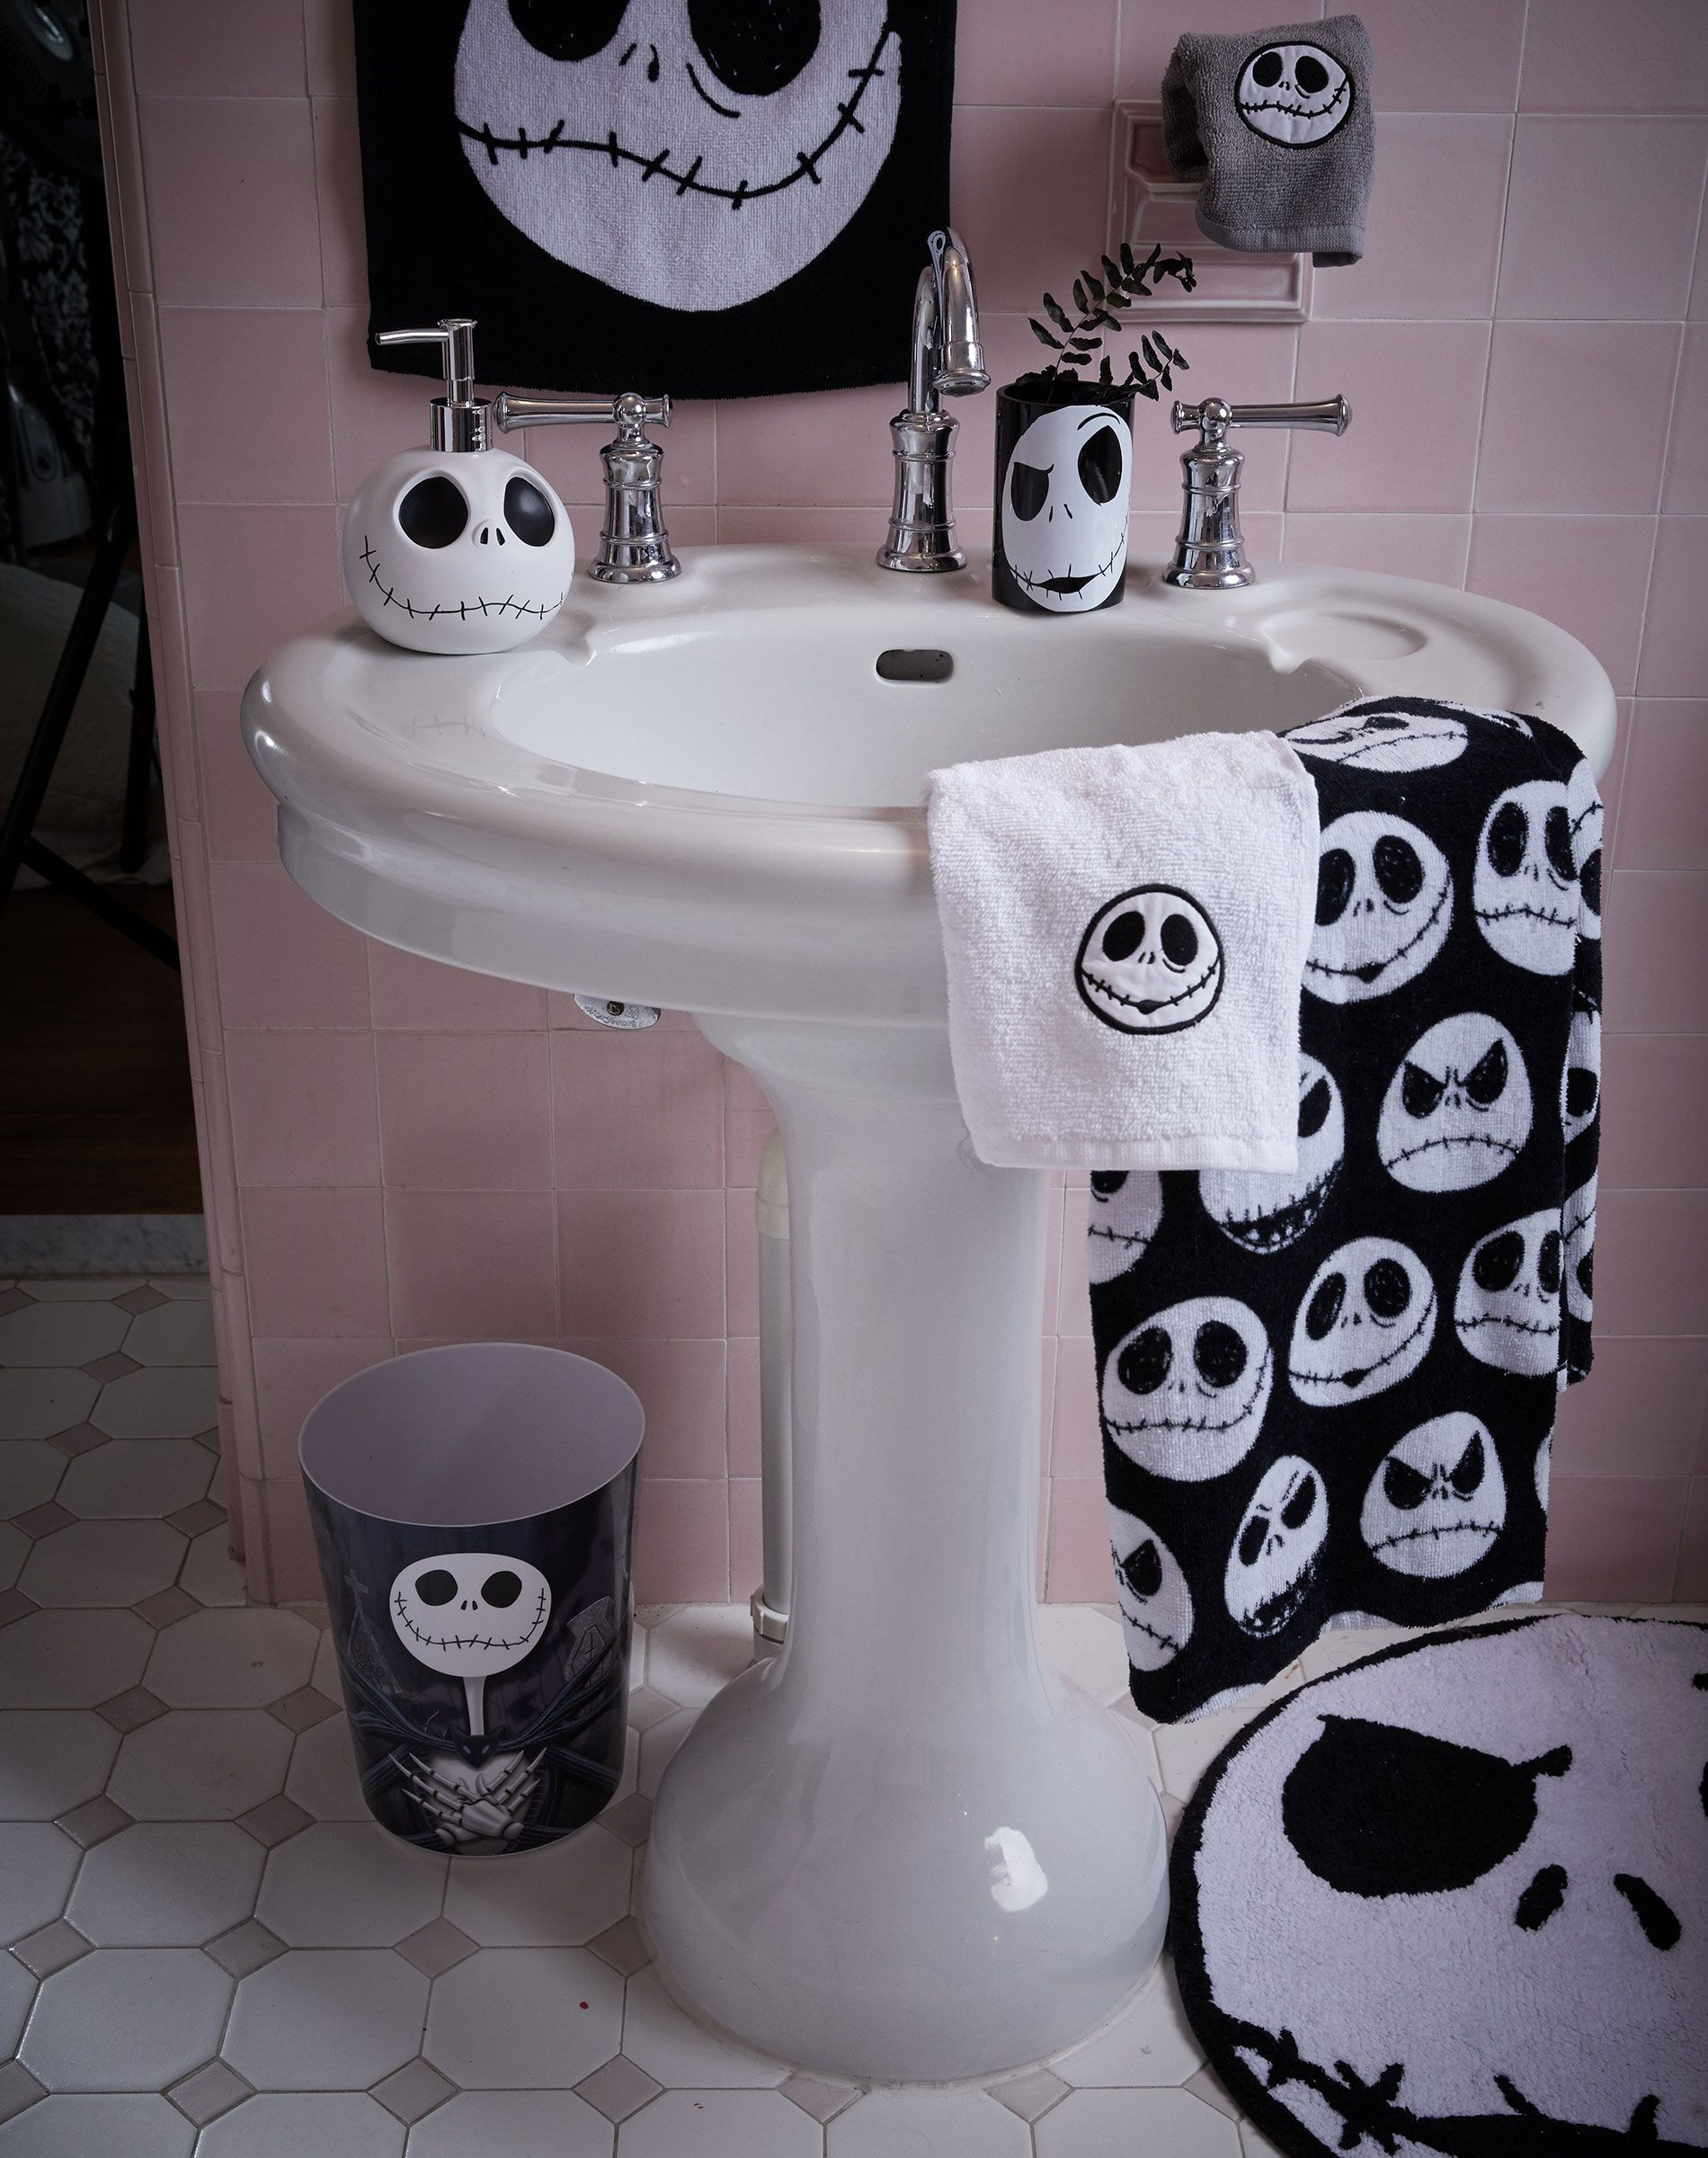 Nightmare Before Christmas Bathroom
 This is Halloween Fill your bathroom with the Pumpkin